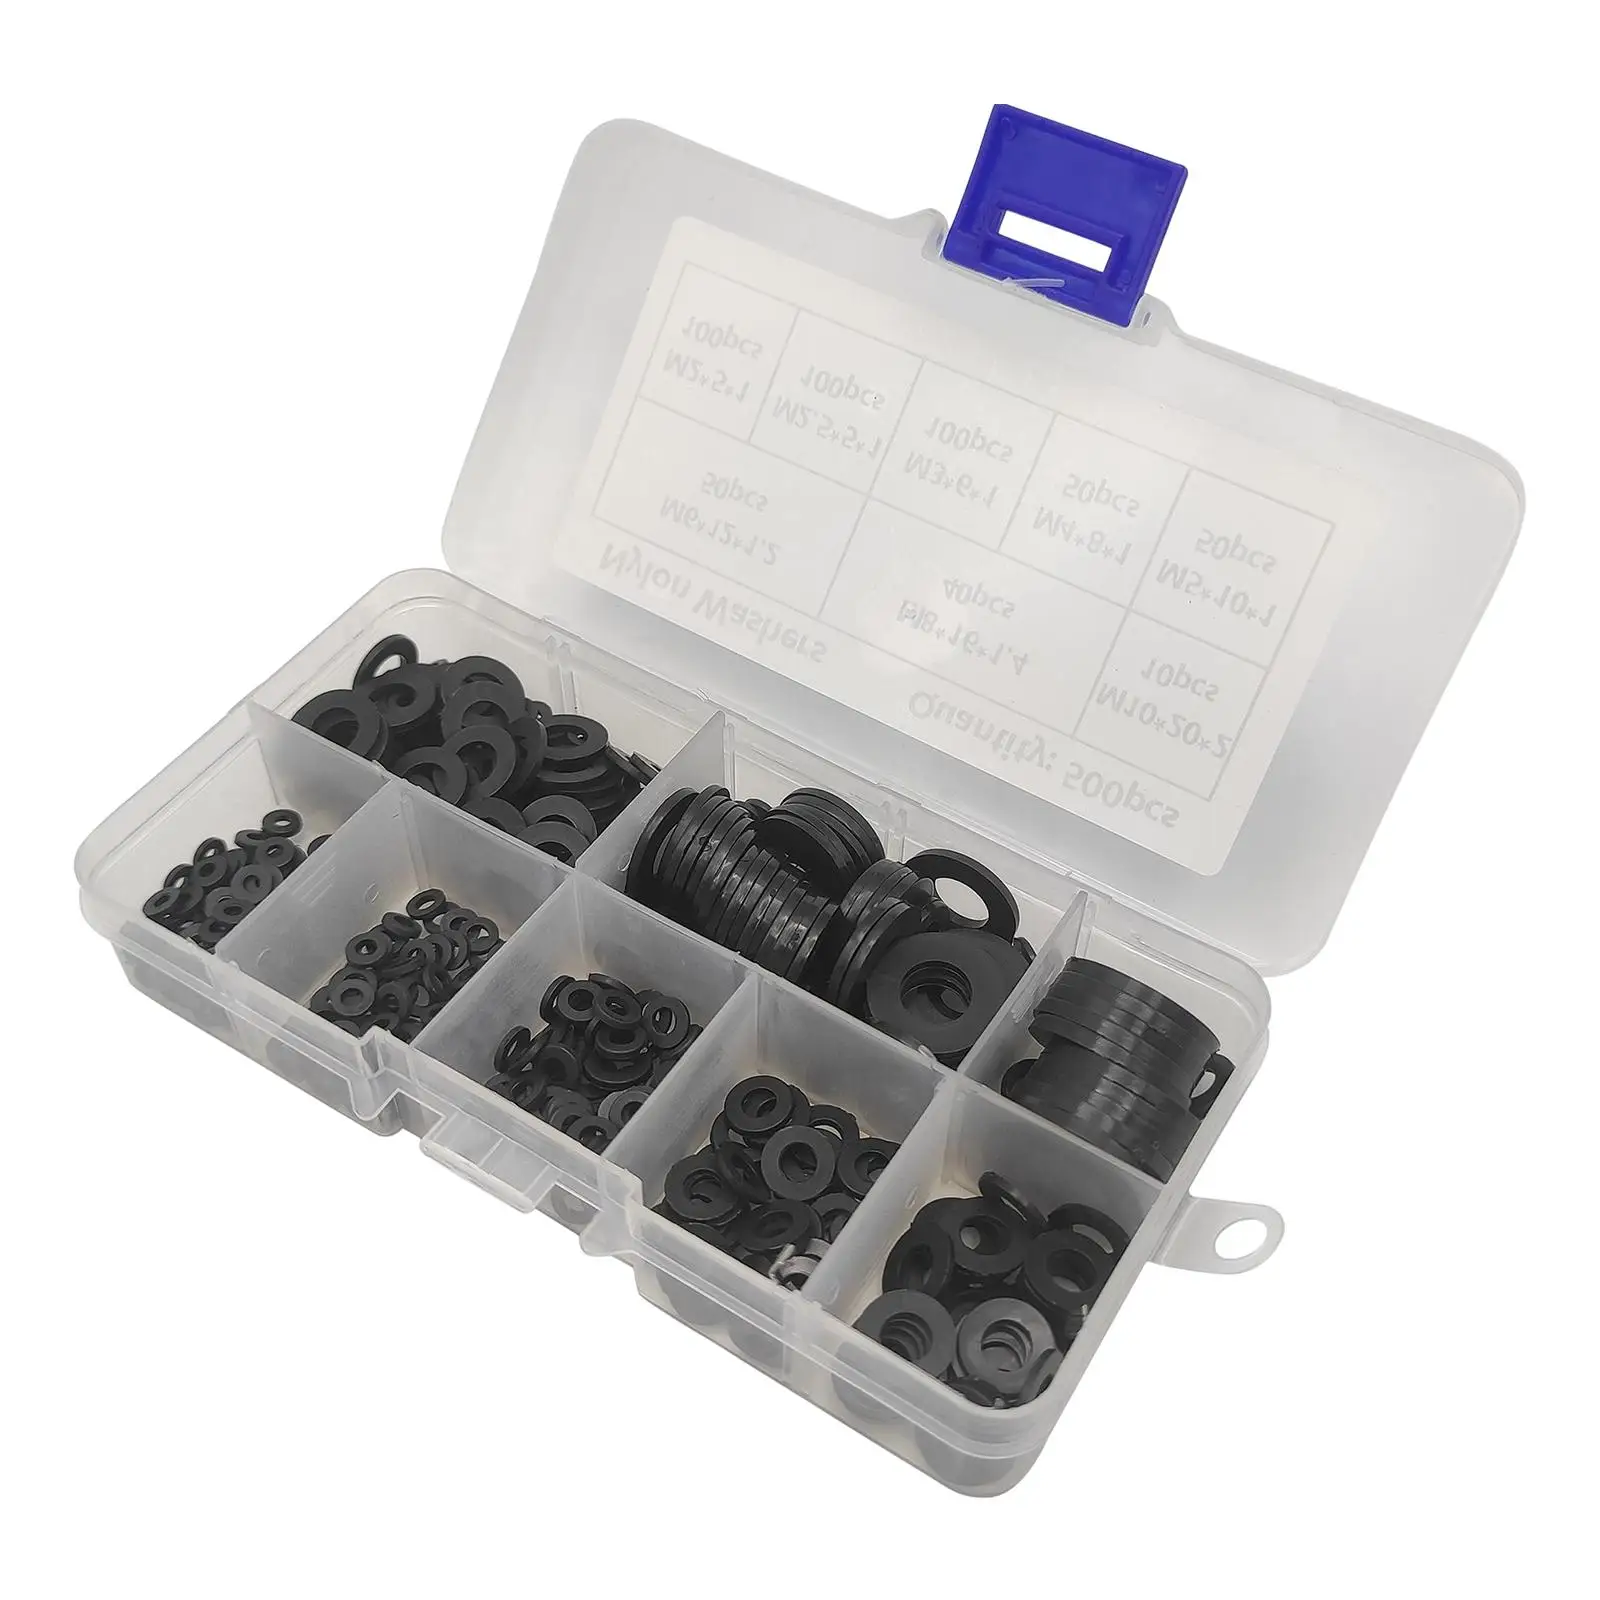 500 Pieces Washer Kit Assortment, Assorted Flat Washers Set, for Marine Auto Car Repair